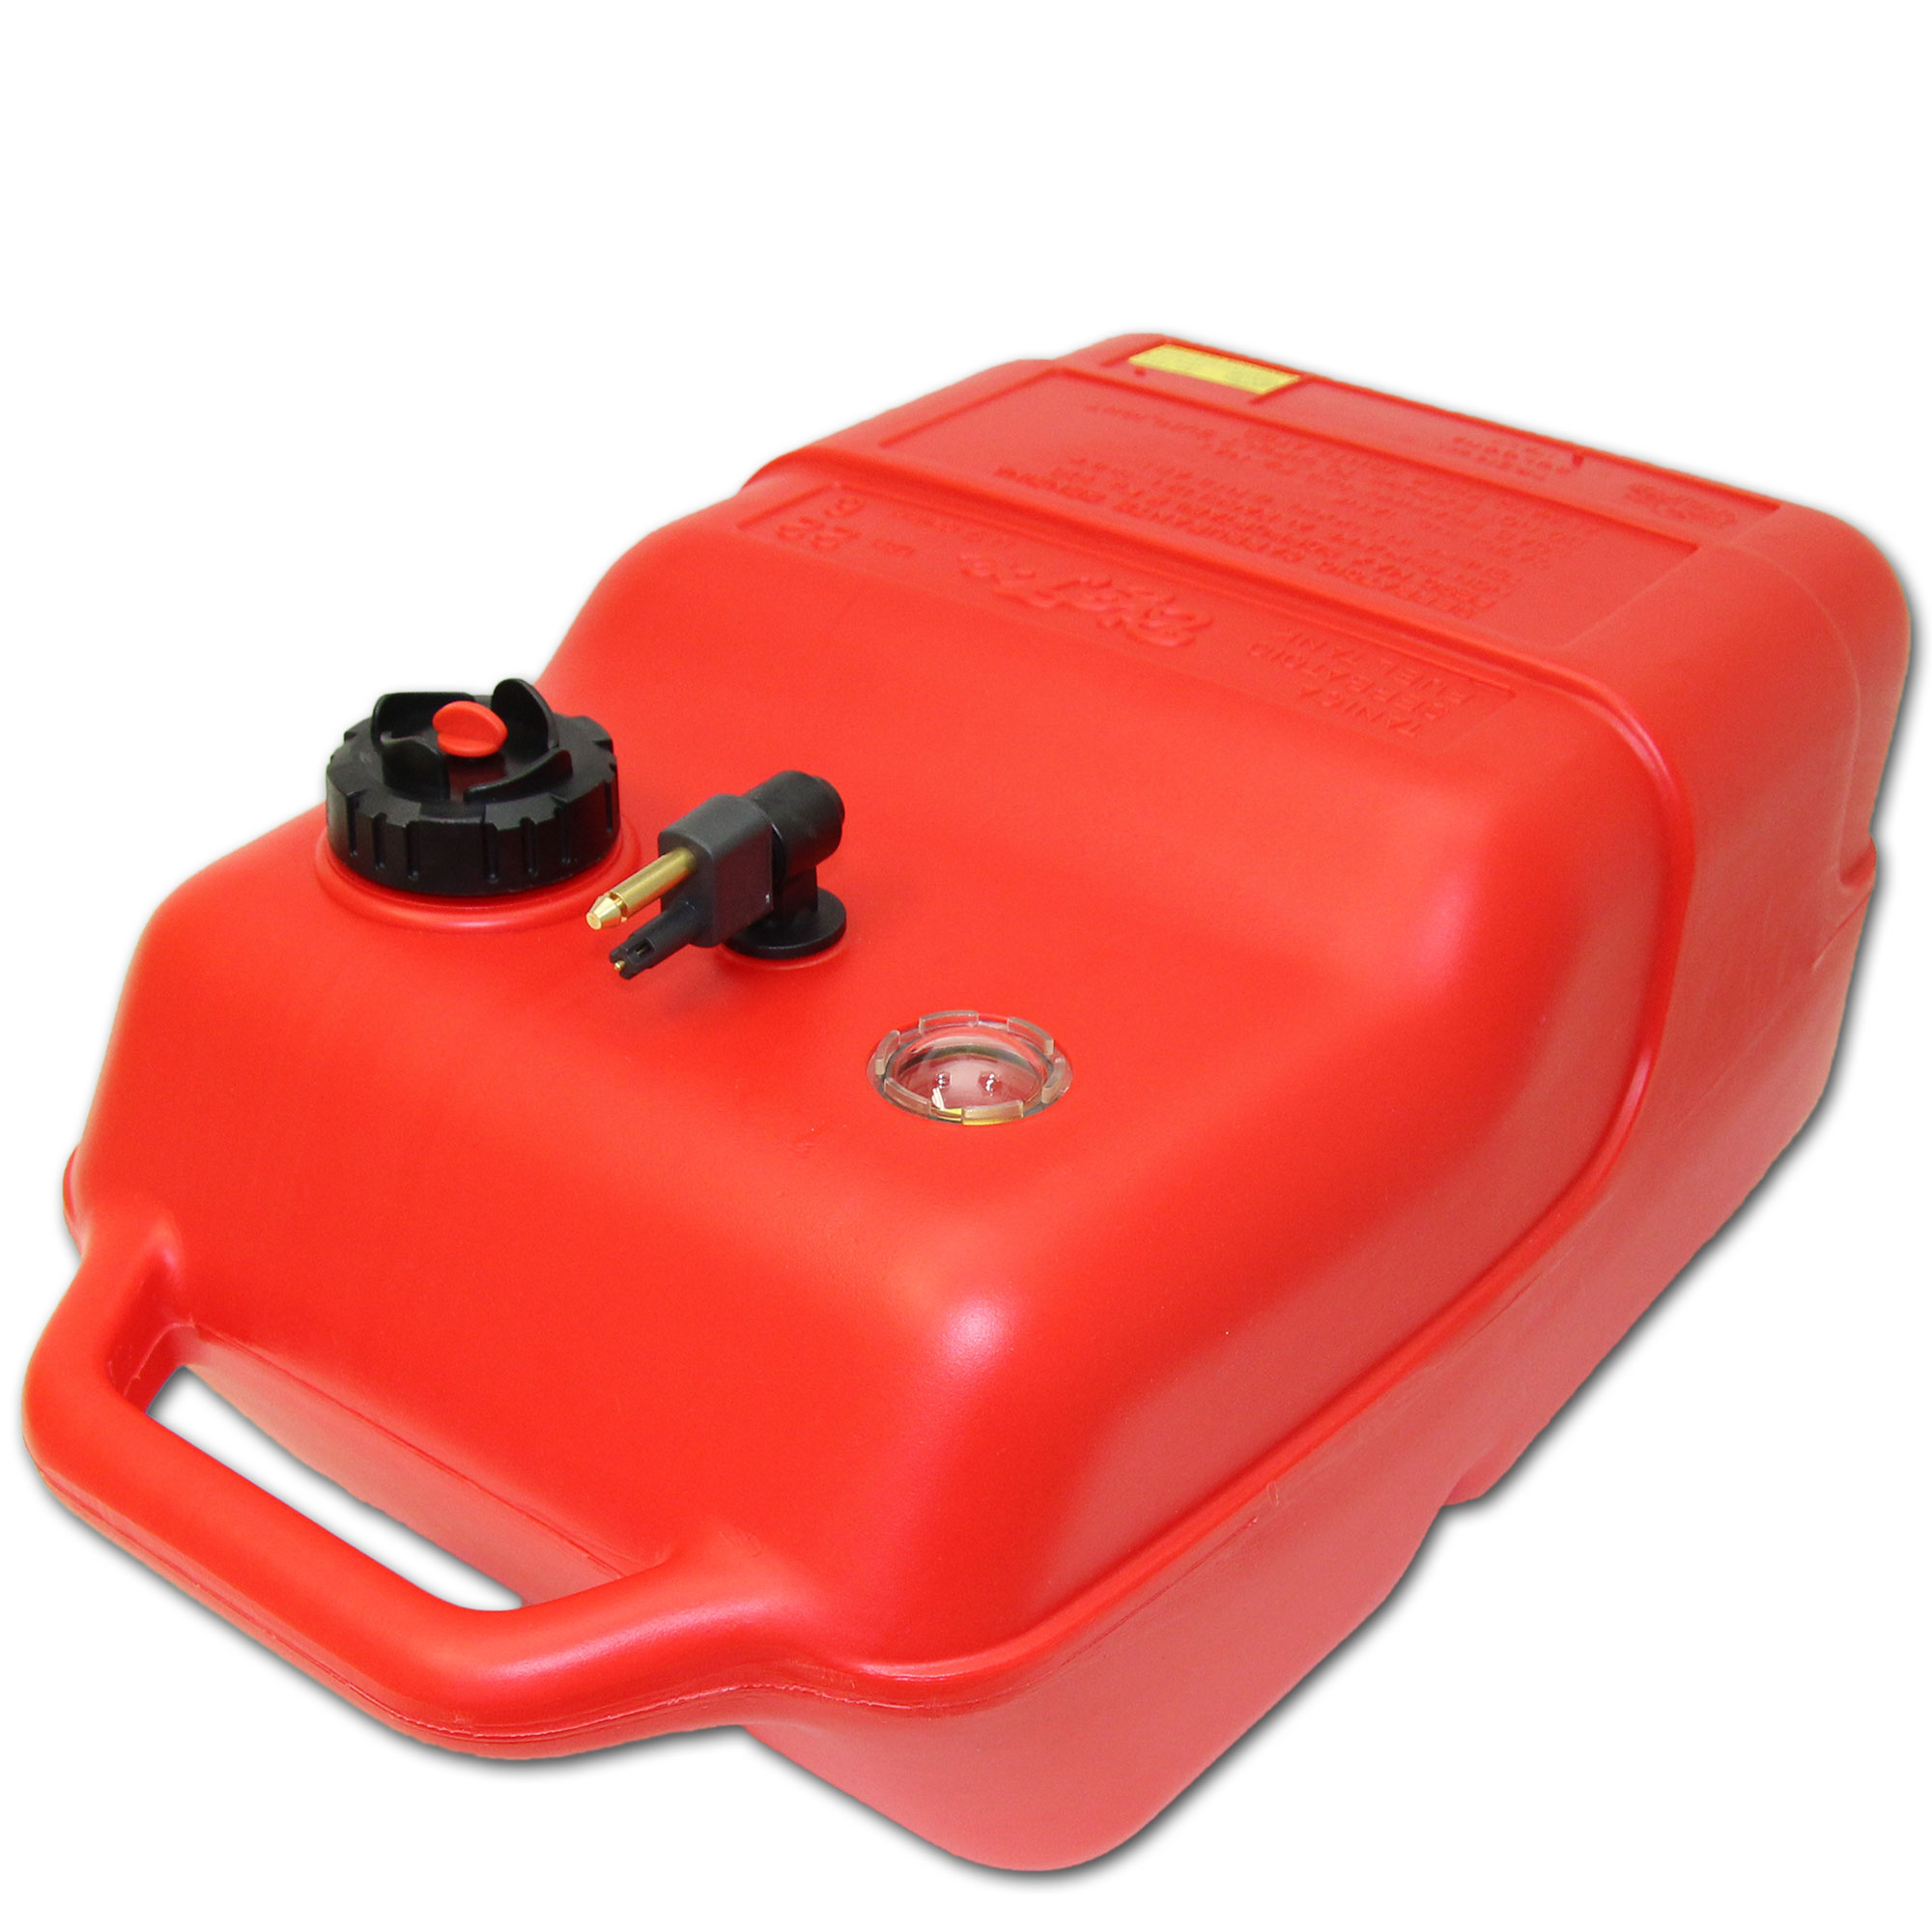 Fuel tank red with Mercury & Mariner connection / level indicator manual